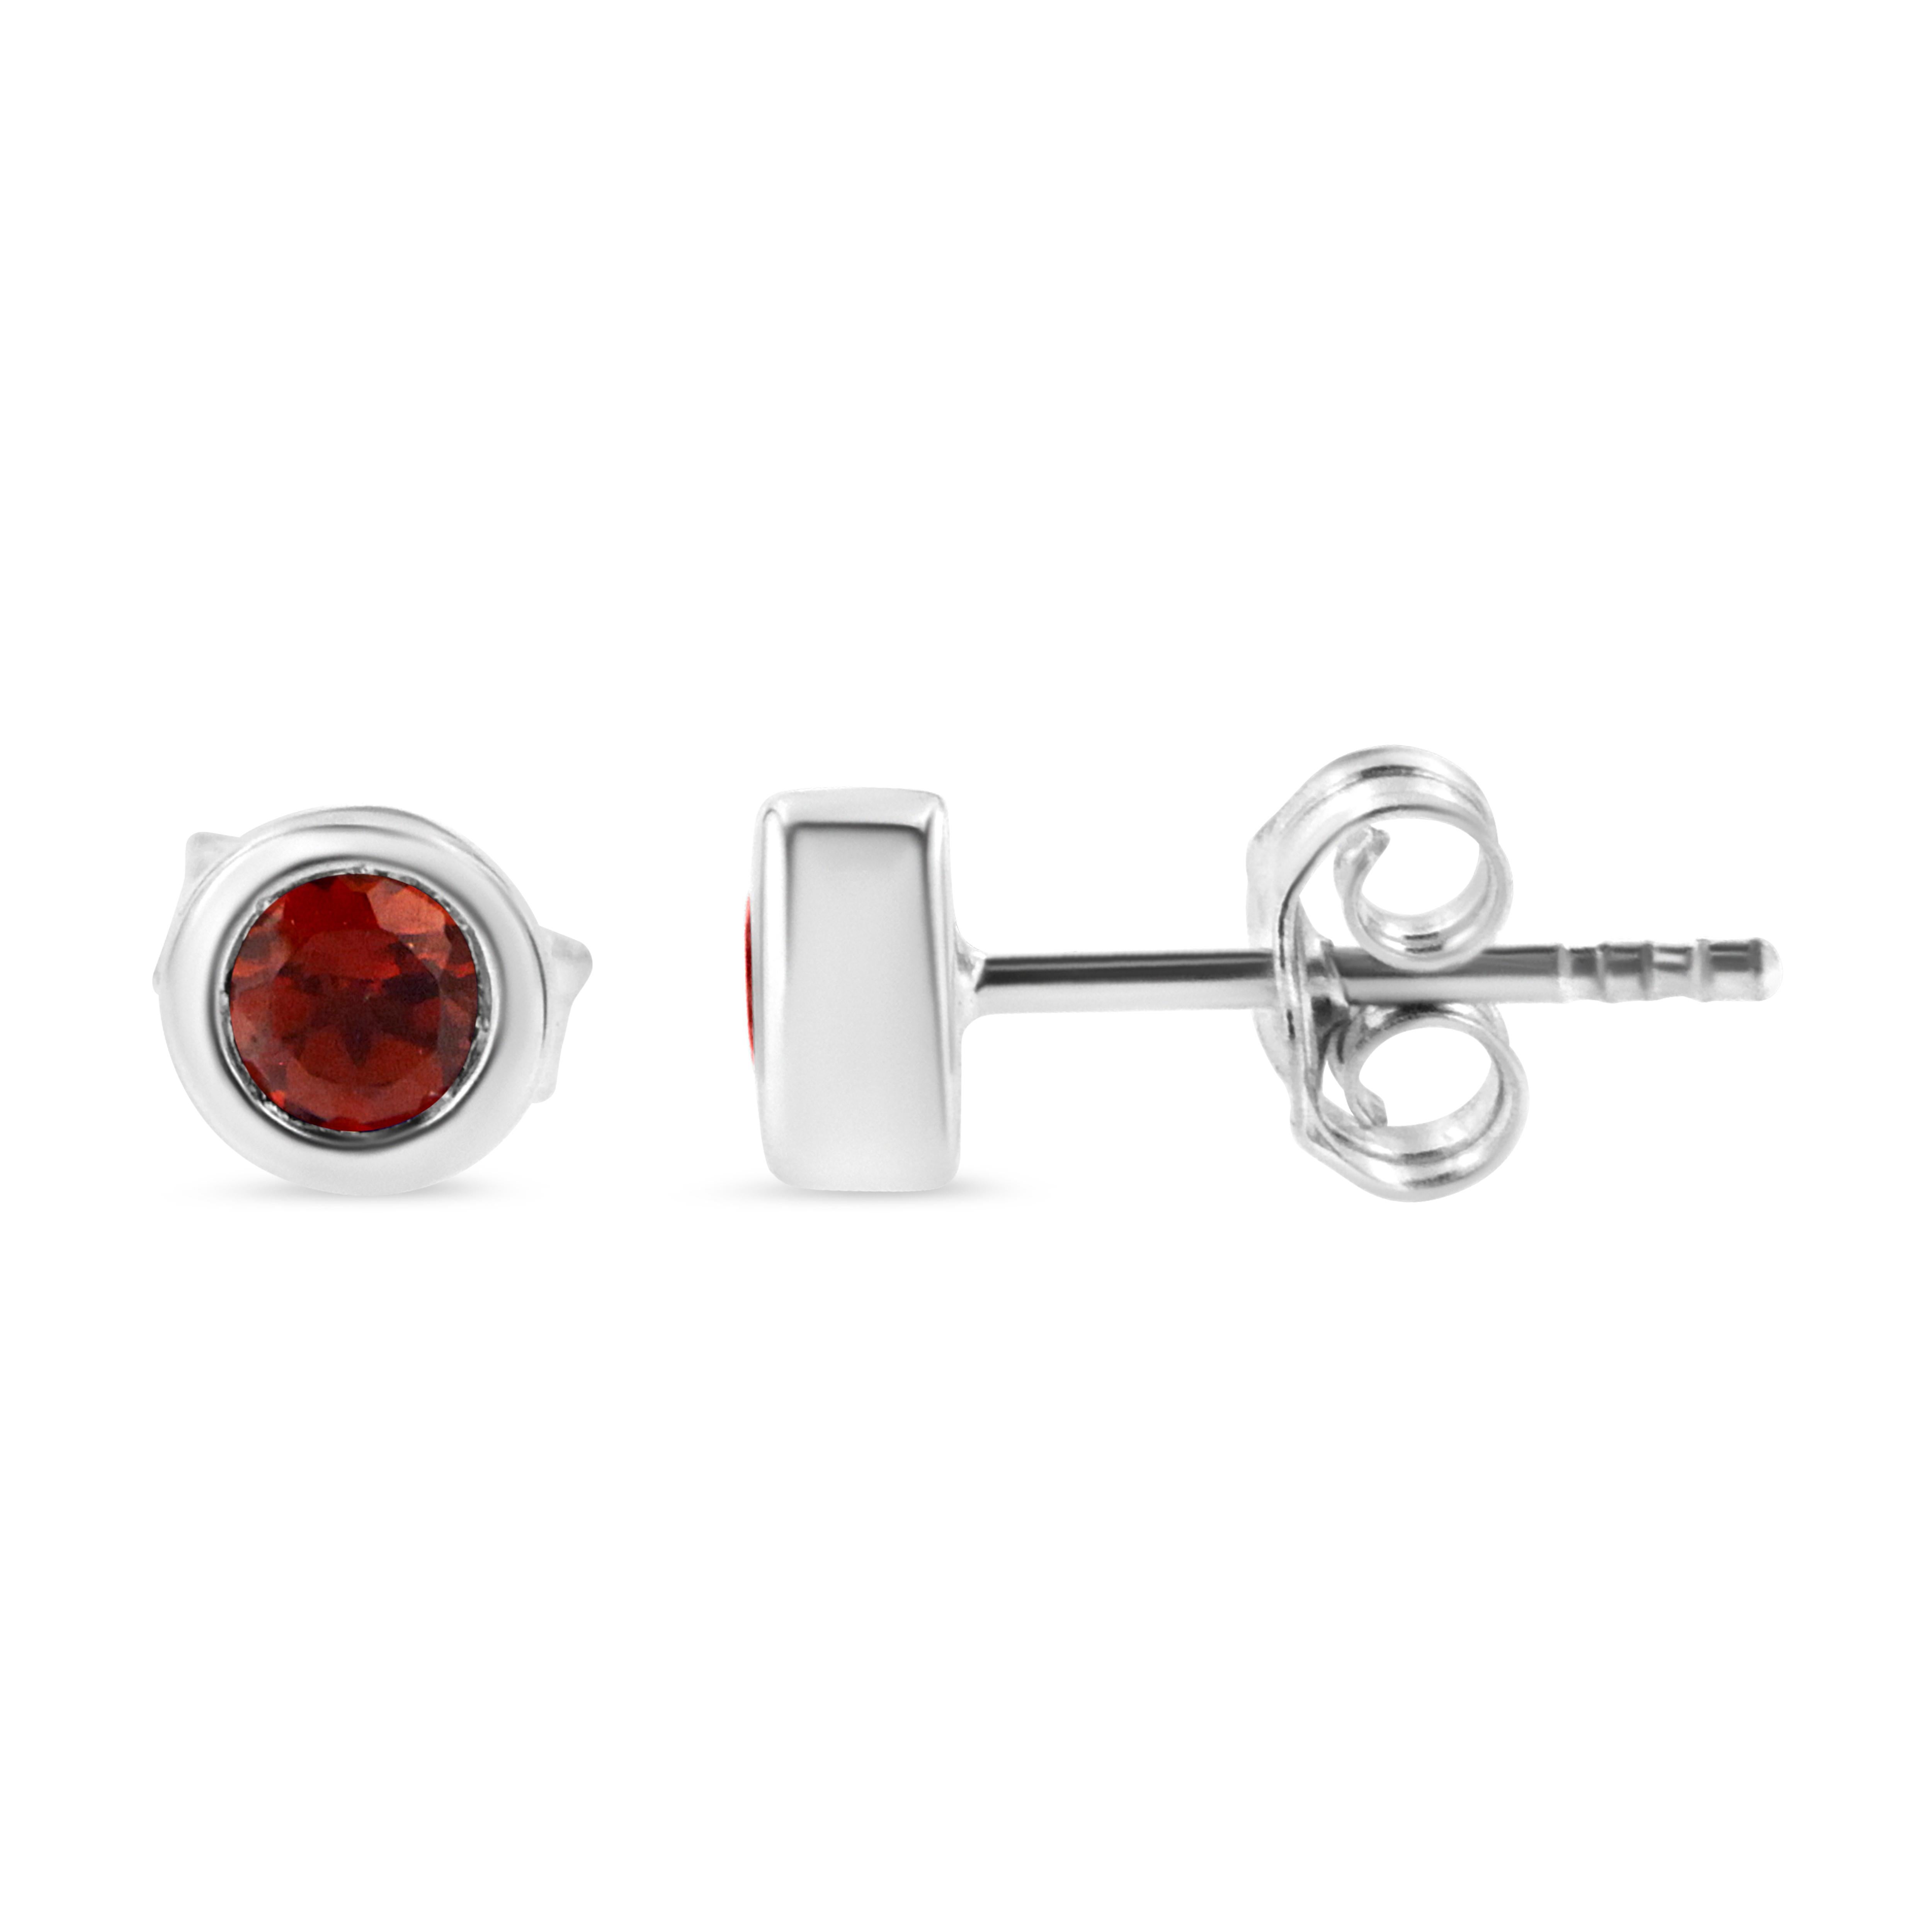 Striking and timeless, these stunning .925 sterling silver solitaire stud earrings feature bold ruby gemstones in a bezel setting. The gemstones are 3.5mm and treated red in color. The notched posts and friction backs keep these pierced earrings